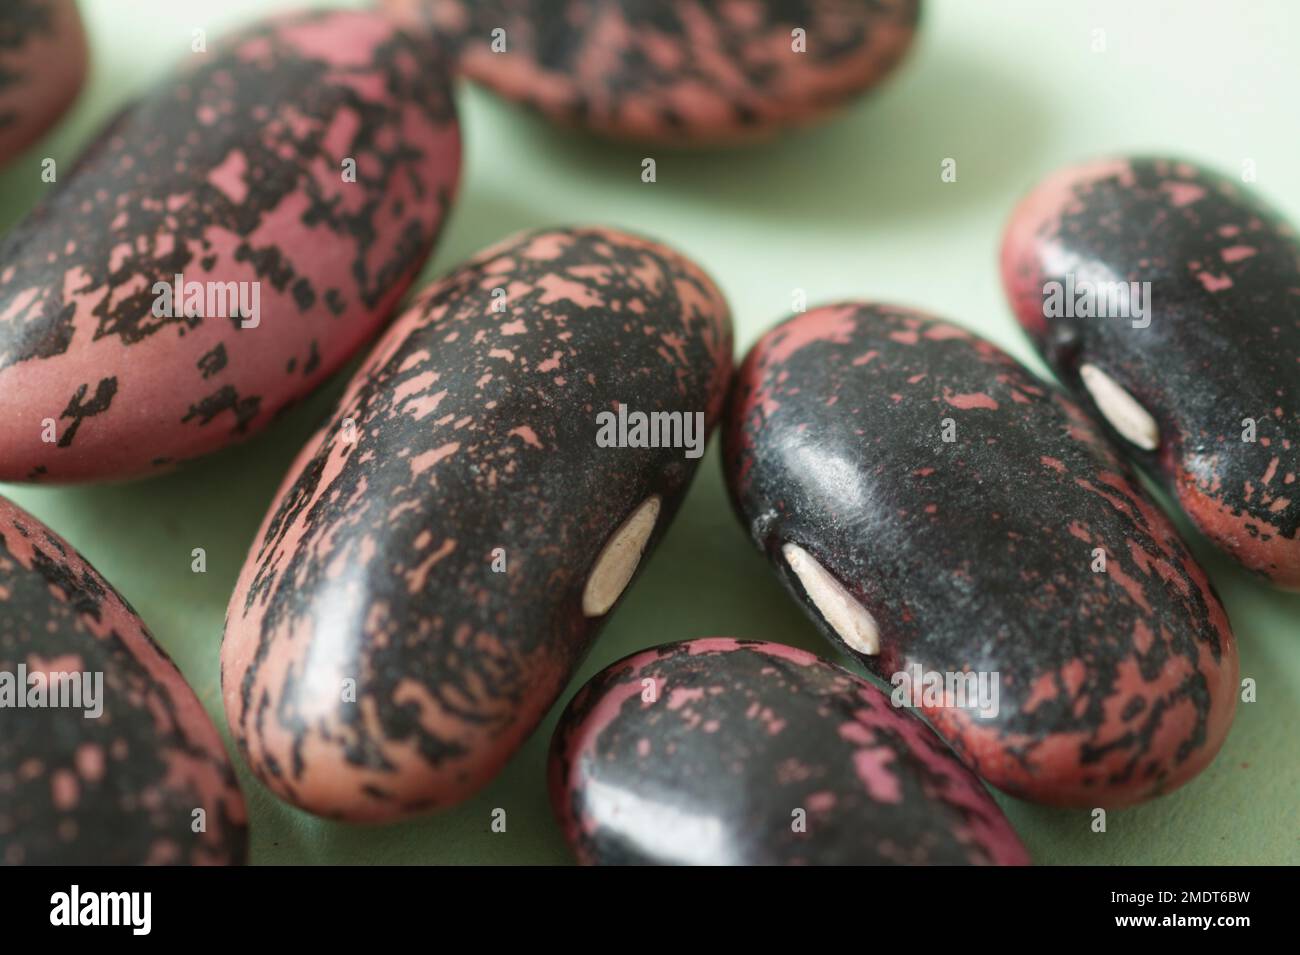 Seeds of the runner bean plant variety 'Scarlet Emperor' Stock Photo